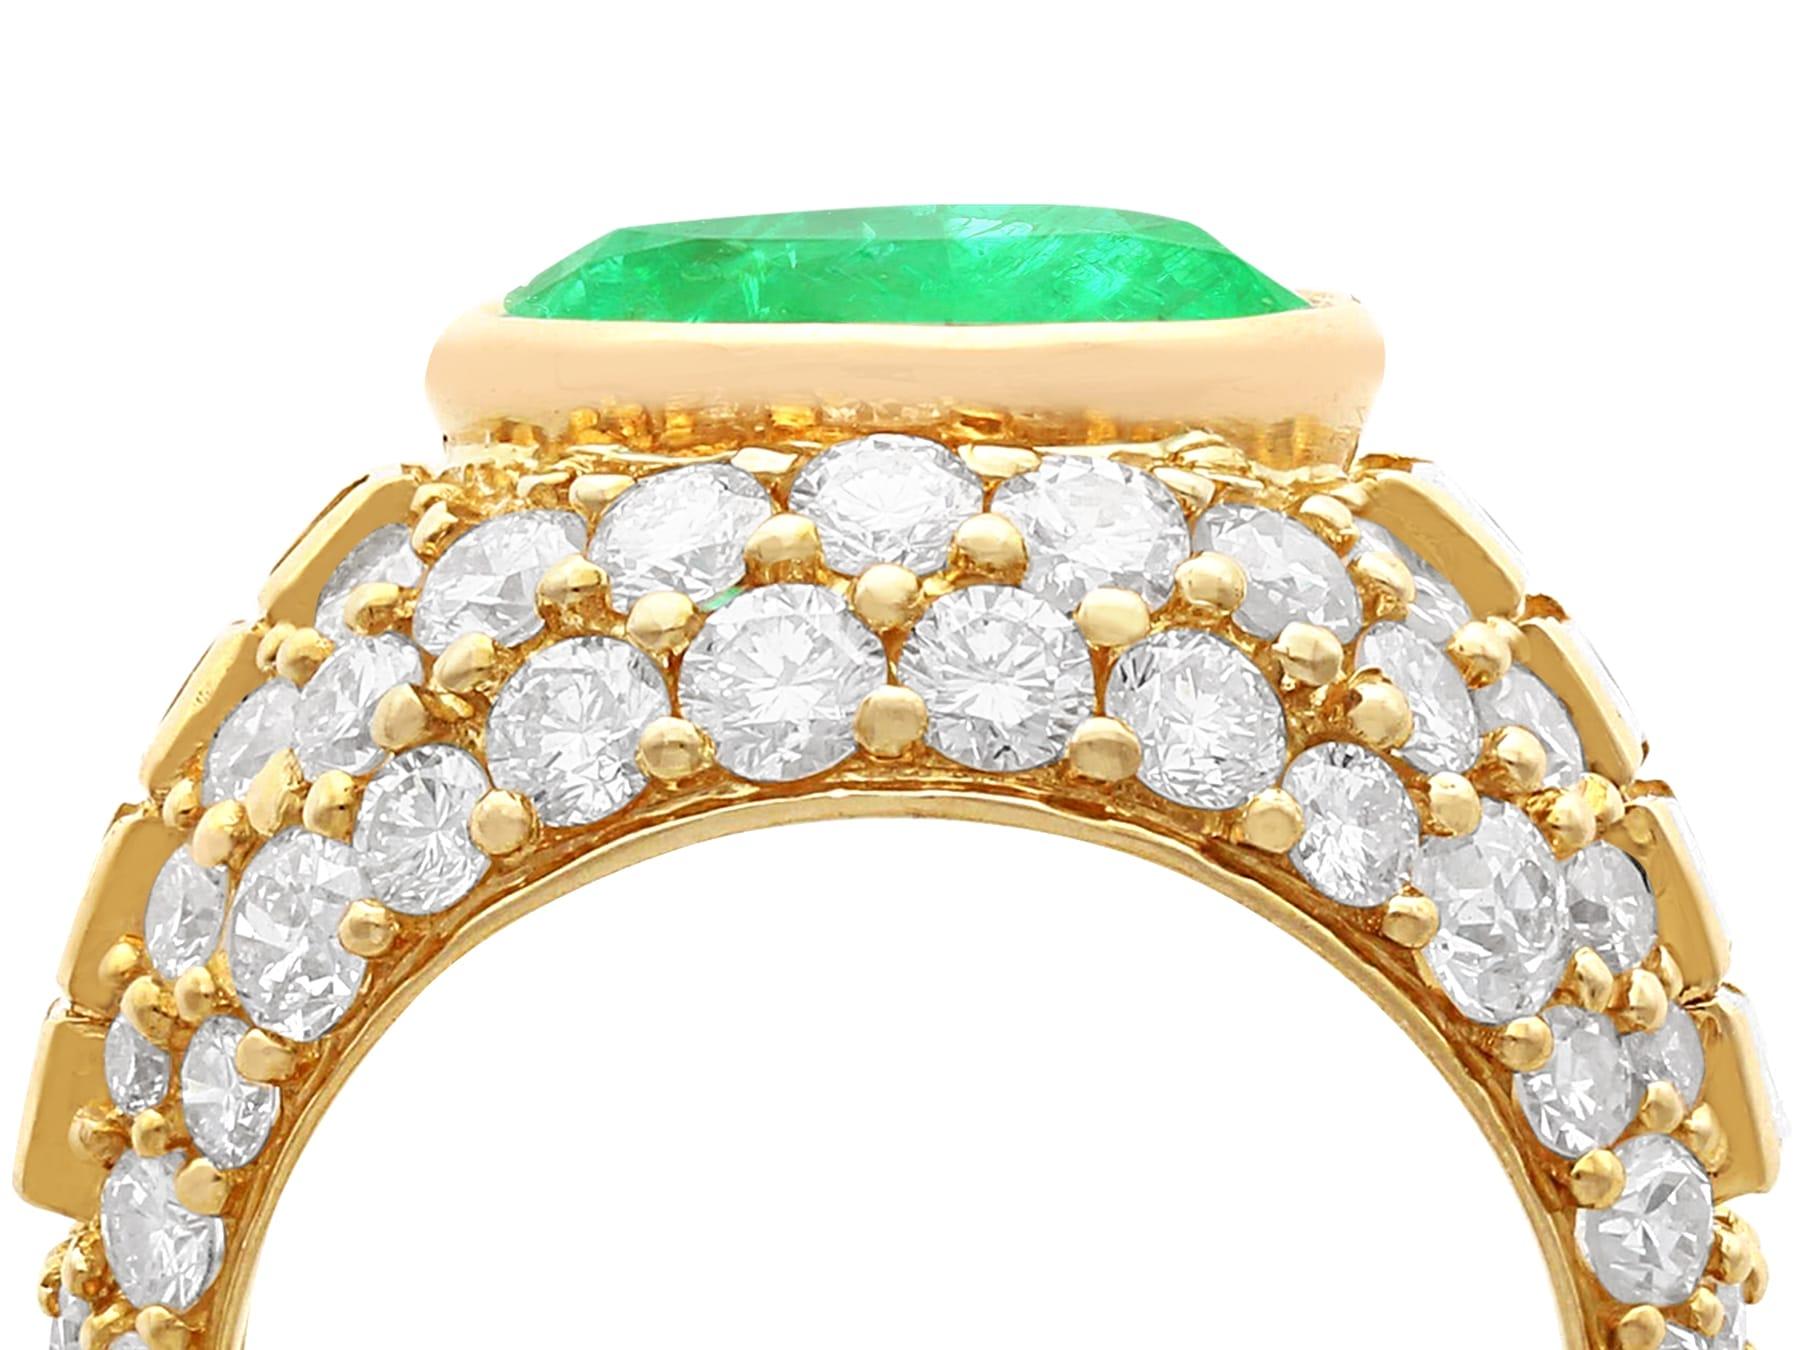 Round Cut Vintage 5.12ct Colombian Emerald and 3.45ct Diamond, 18ct Yellow Gold Dress Ring For Sale